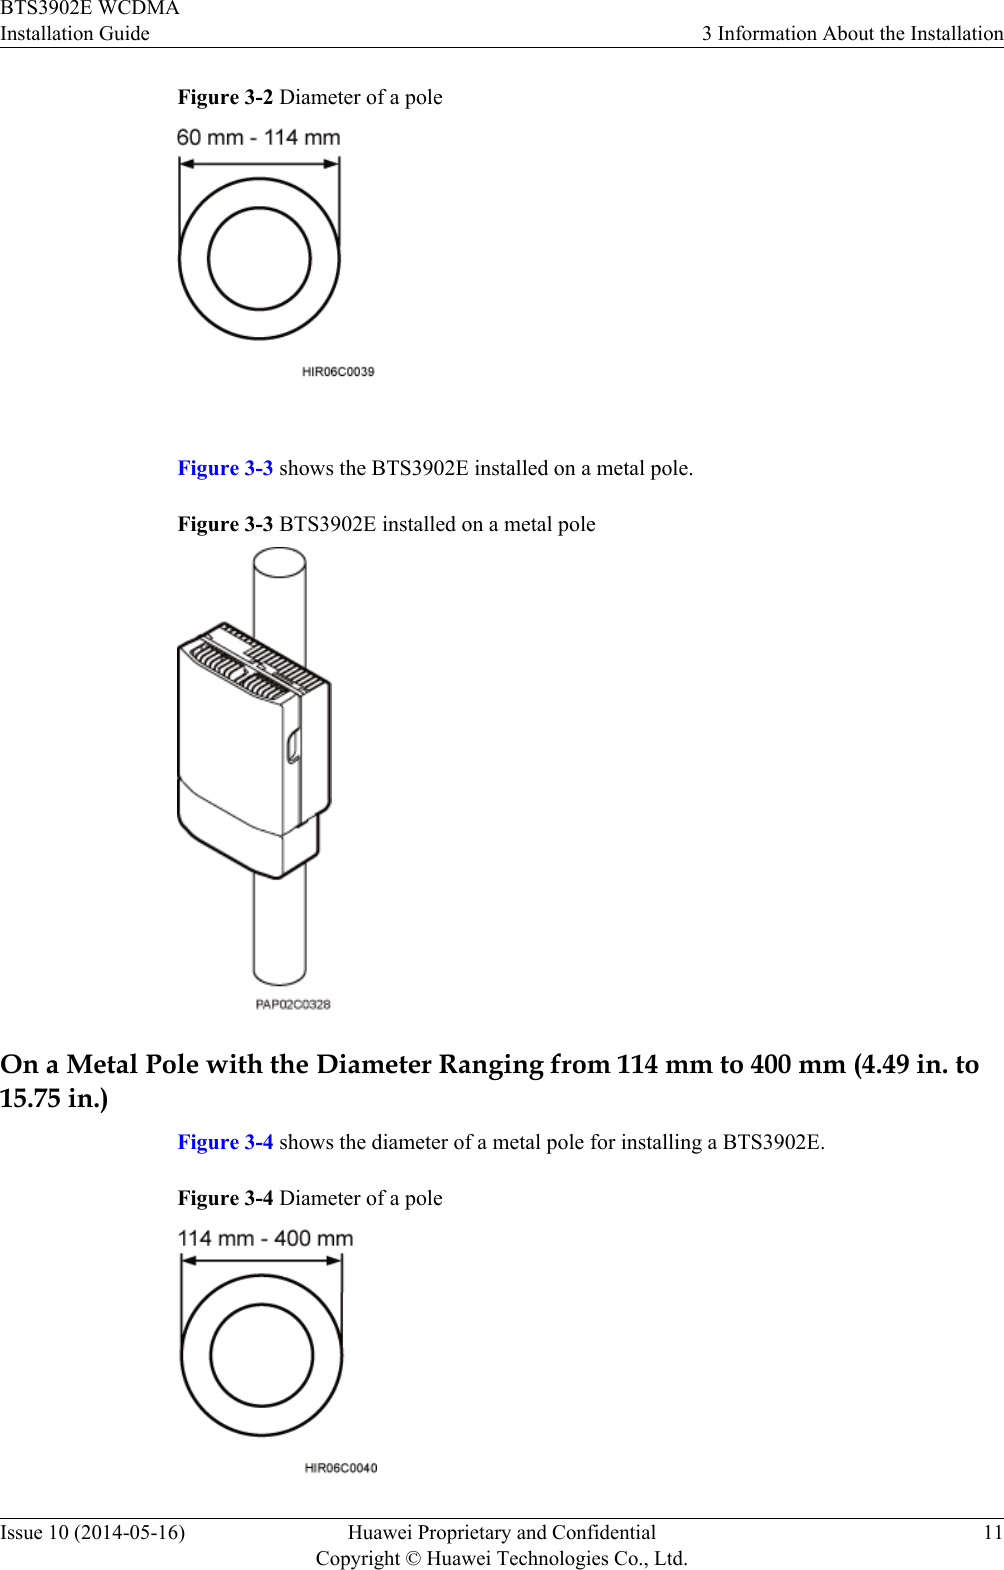 Figure 3-2 Diameter of a pole Figure 3-3 shows the BTS3902E installed on a metal pole.Figure 3-3 BTS3902E installed on a metal poleOn a Metal Pole with the Diameter Ranging from 114 mm to 400 mm (4.49 in. to15.75 in.)Figure 3-4 shows the diameter of a metal pole for installing a BTS3902E.Figure 3-4 Diameter of a poleBTS3902E WCDMAInstallation Guide 3 Information About the InstallationIssue 10 (2014-05-16) Huawei Proprietary and ConfidentialCopyright © Huawei Technologies Co., Ltd.11